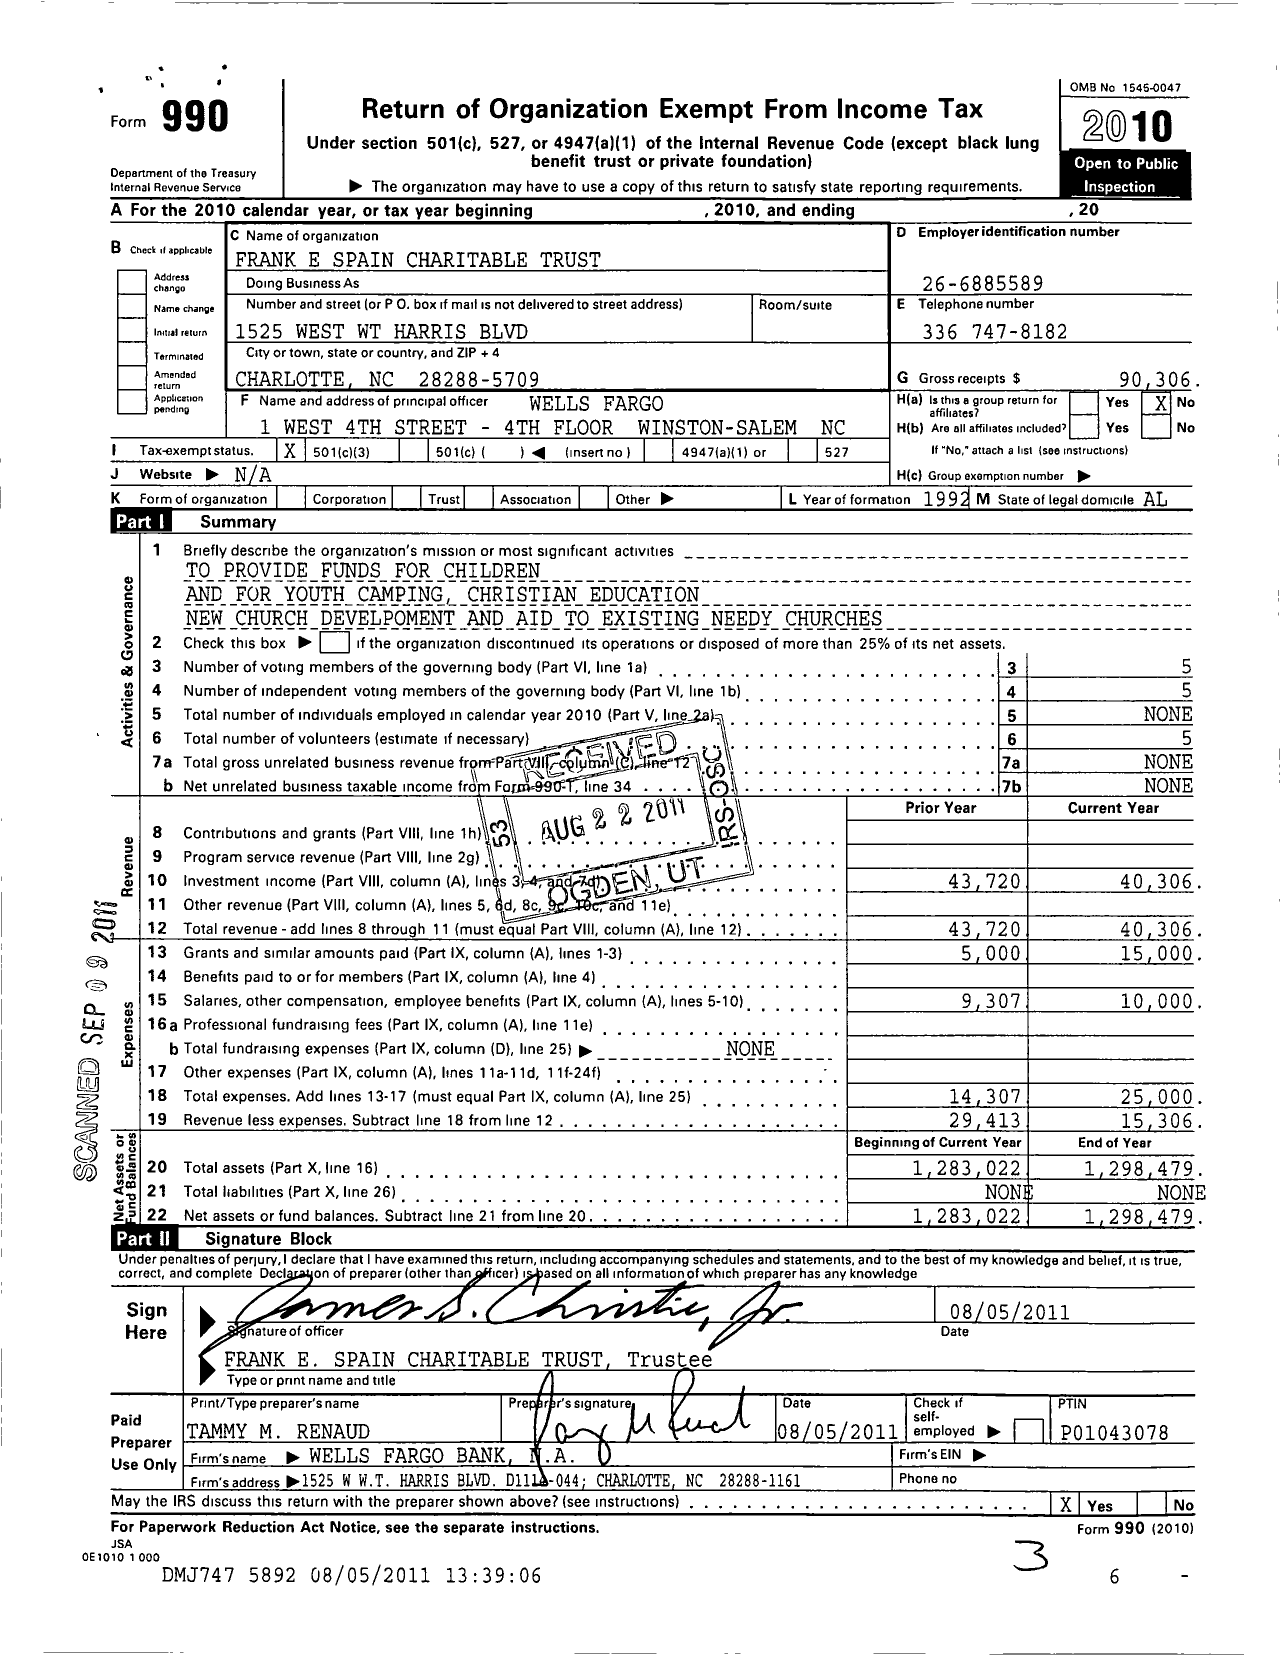 Image of first page of 2010 Form 990 for Frank E Spain Charitable Trust